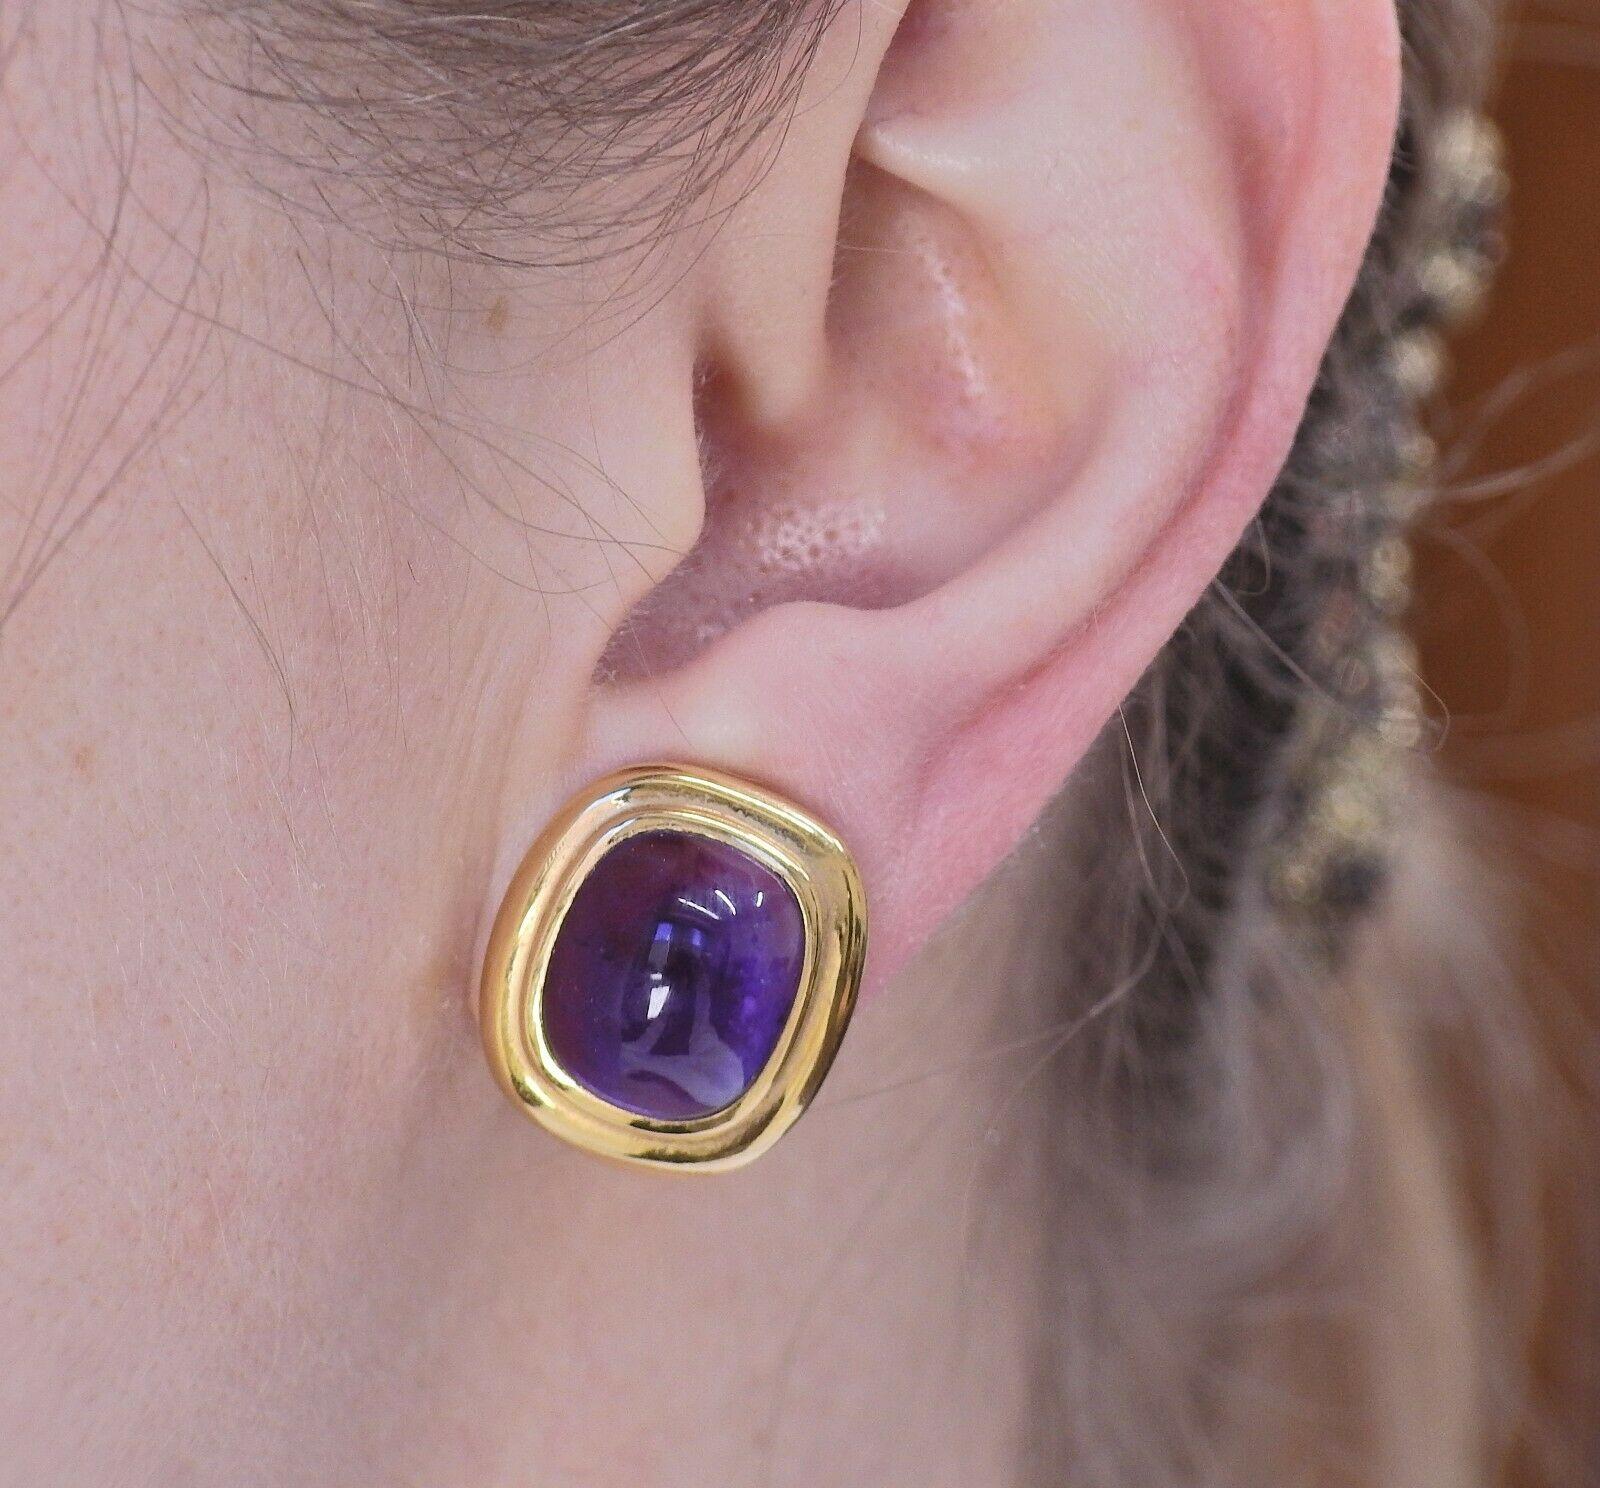 Pair of vintage 8k gold earrings by Tiffany & Co , with amethyst cabochons 12.4 x 10.8mm. Earrings are 18mm x 17mm. Weight - 11.7 grams. Marked: Tiffany & Co, 750. 